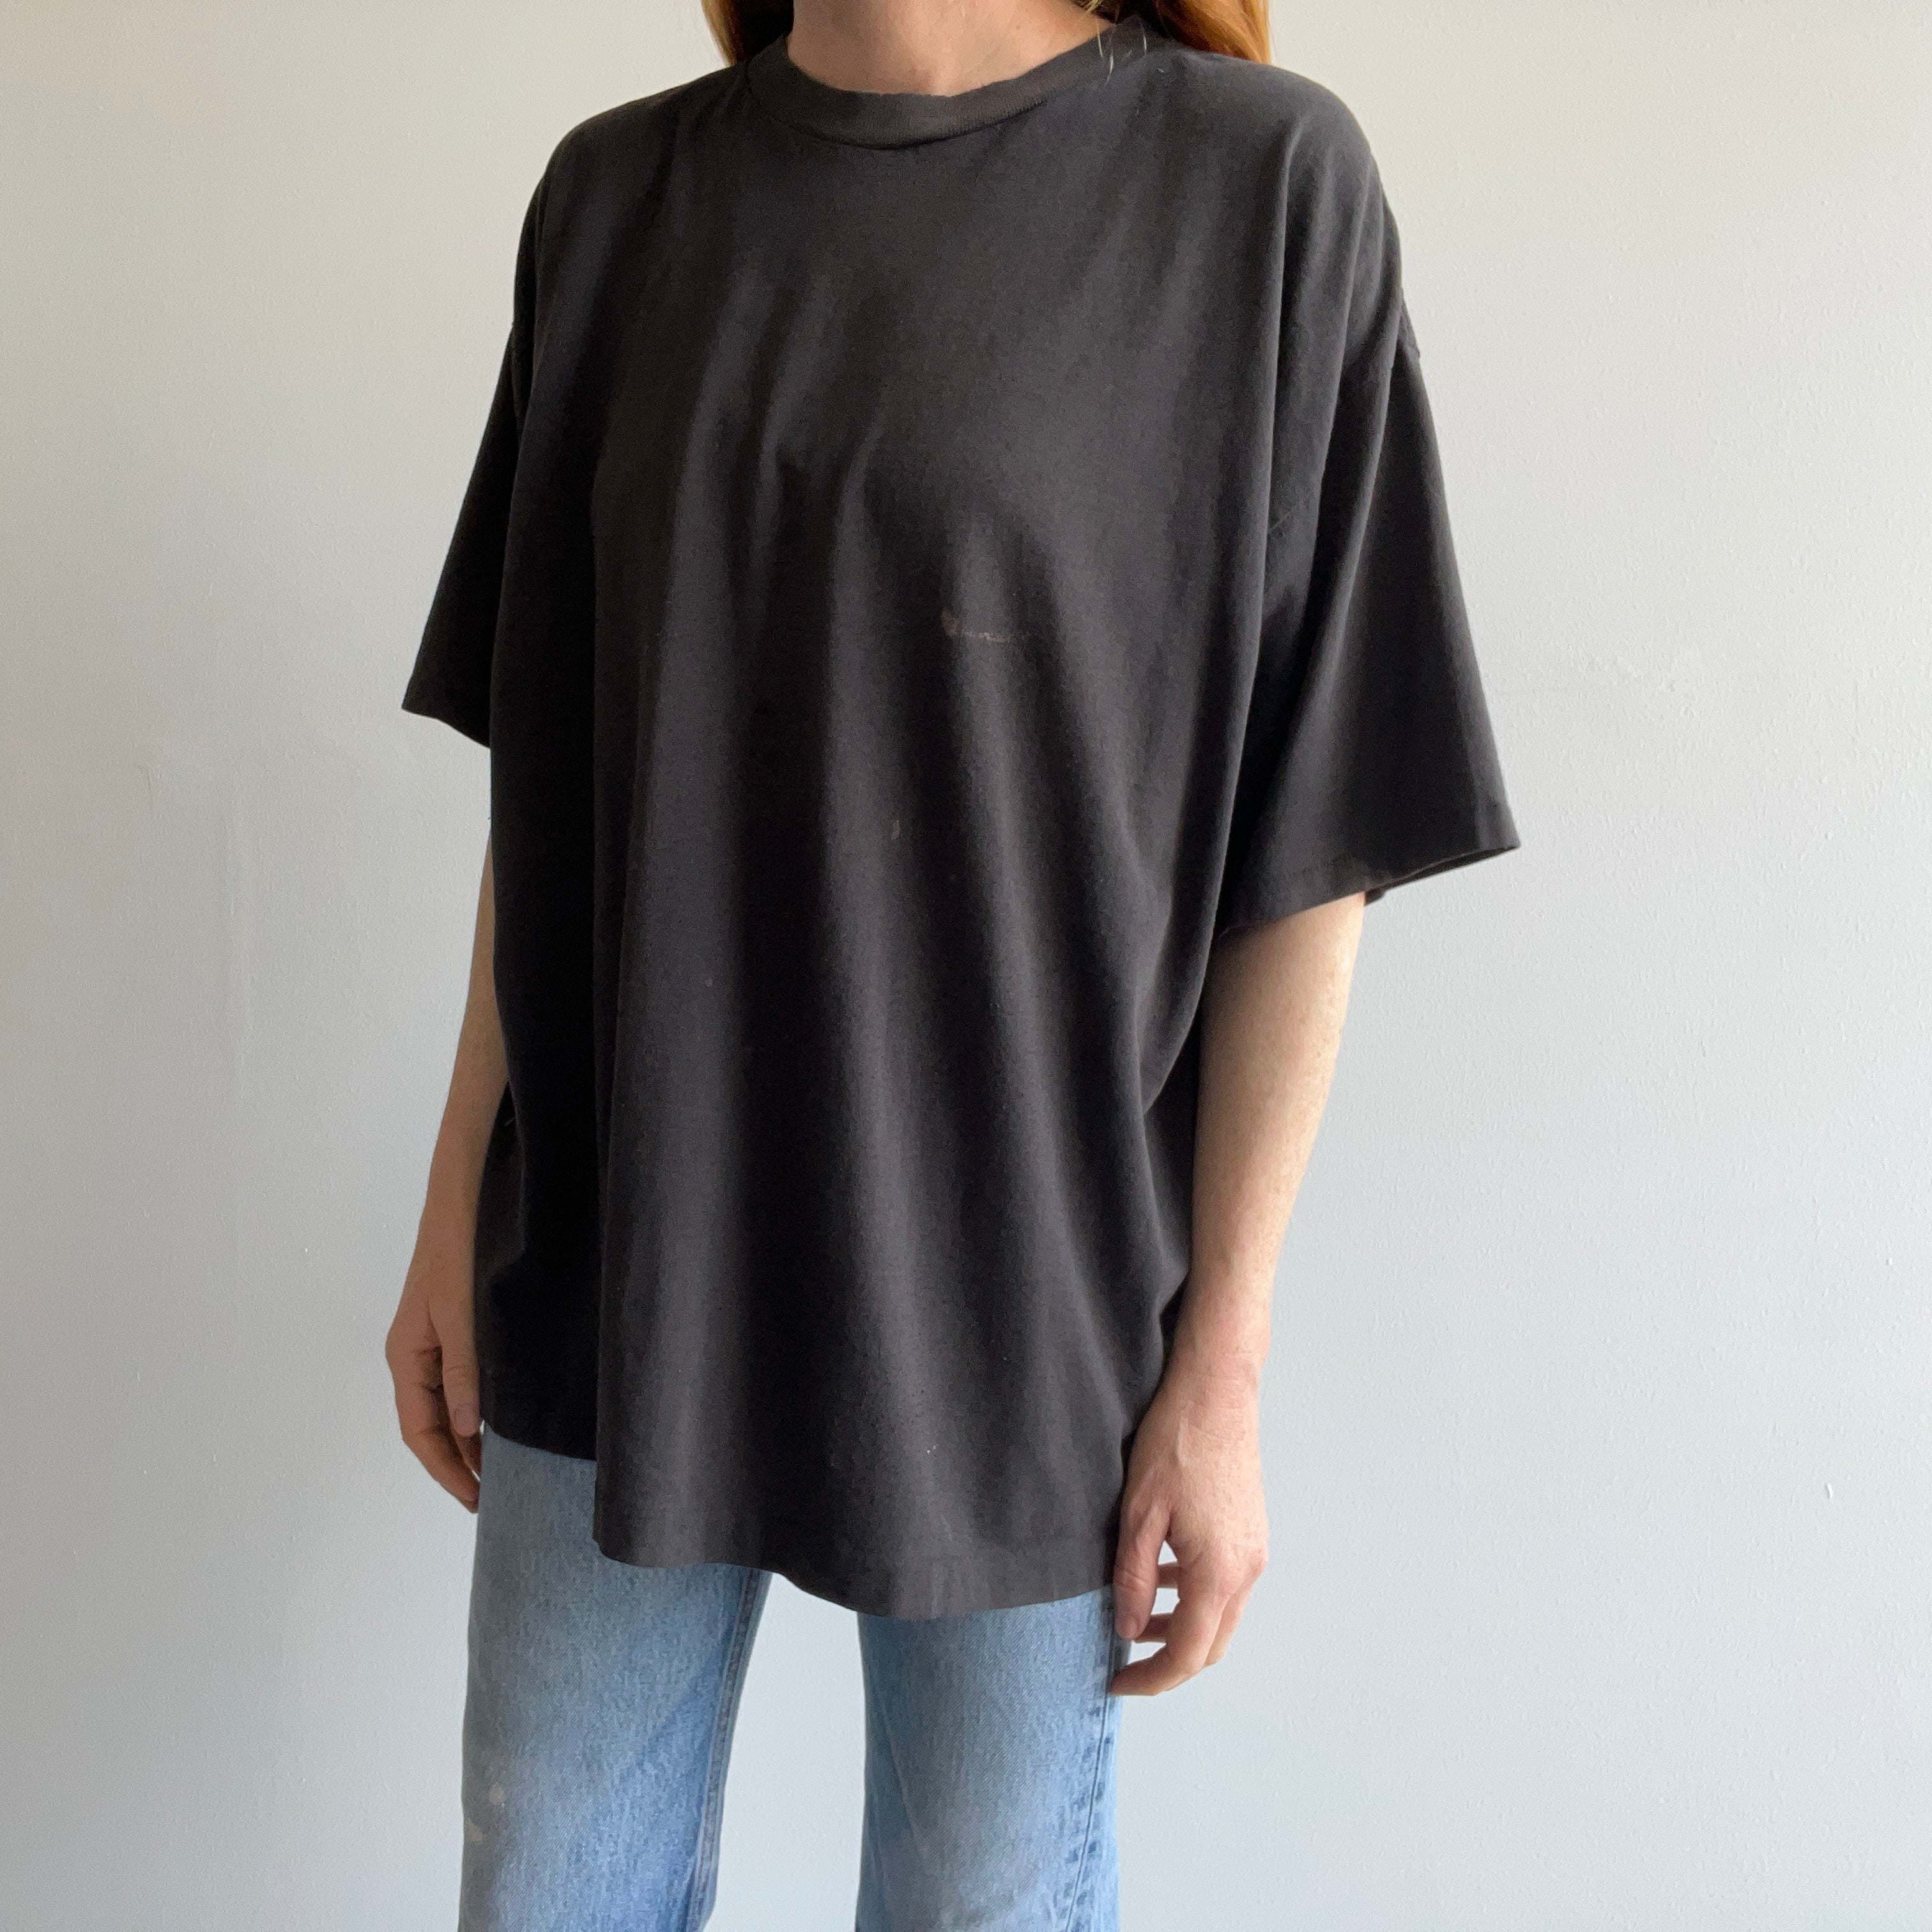 1980/90s Tattered Torn and Worn Larger Faded Blank Black T-Shirt